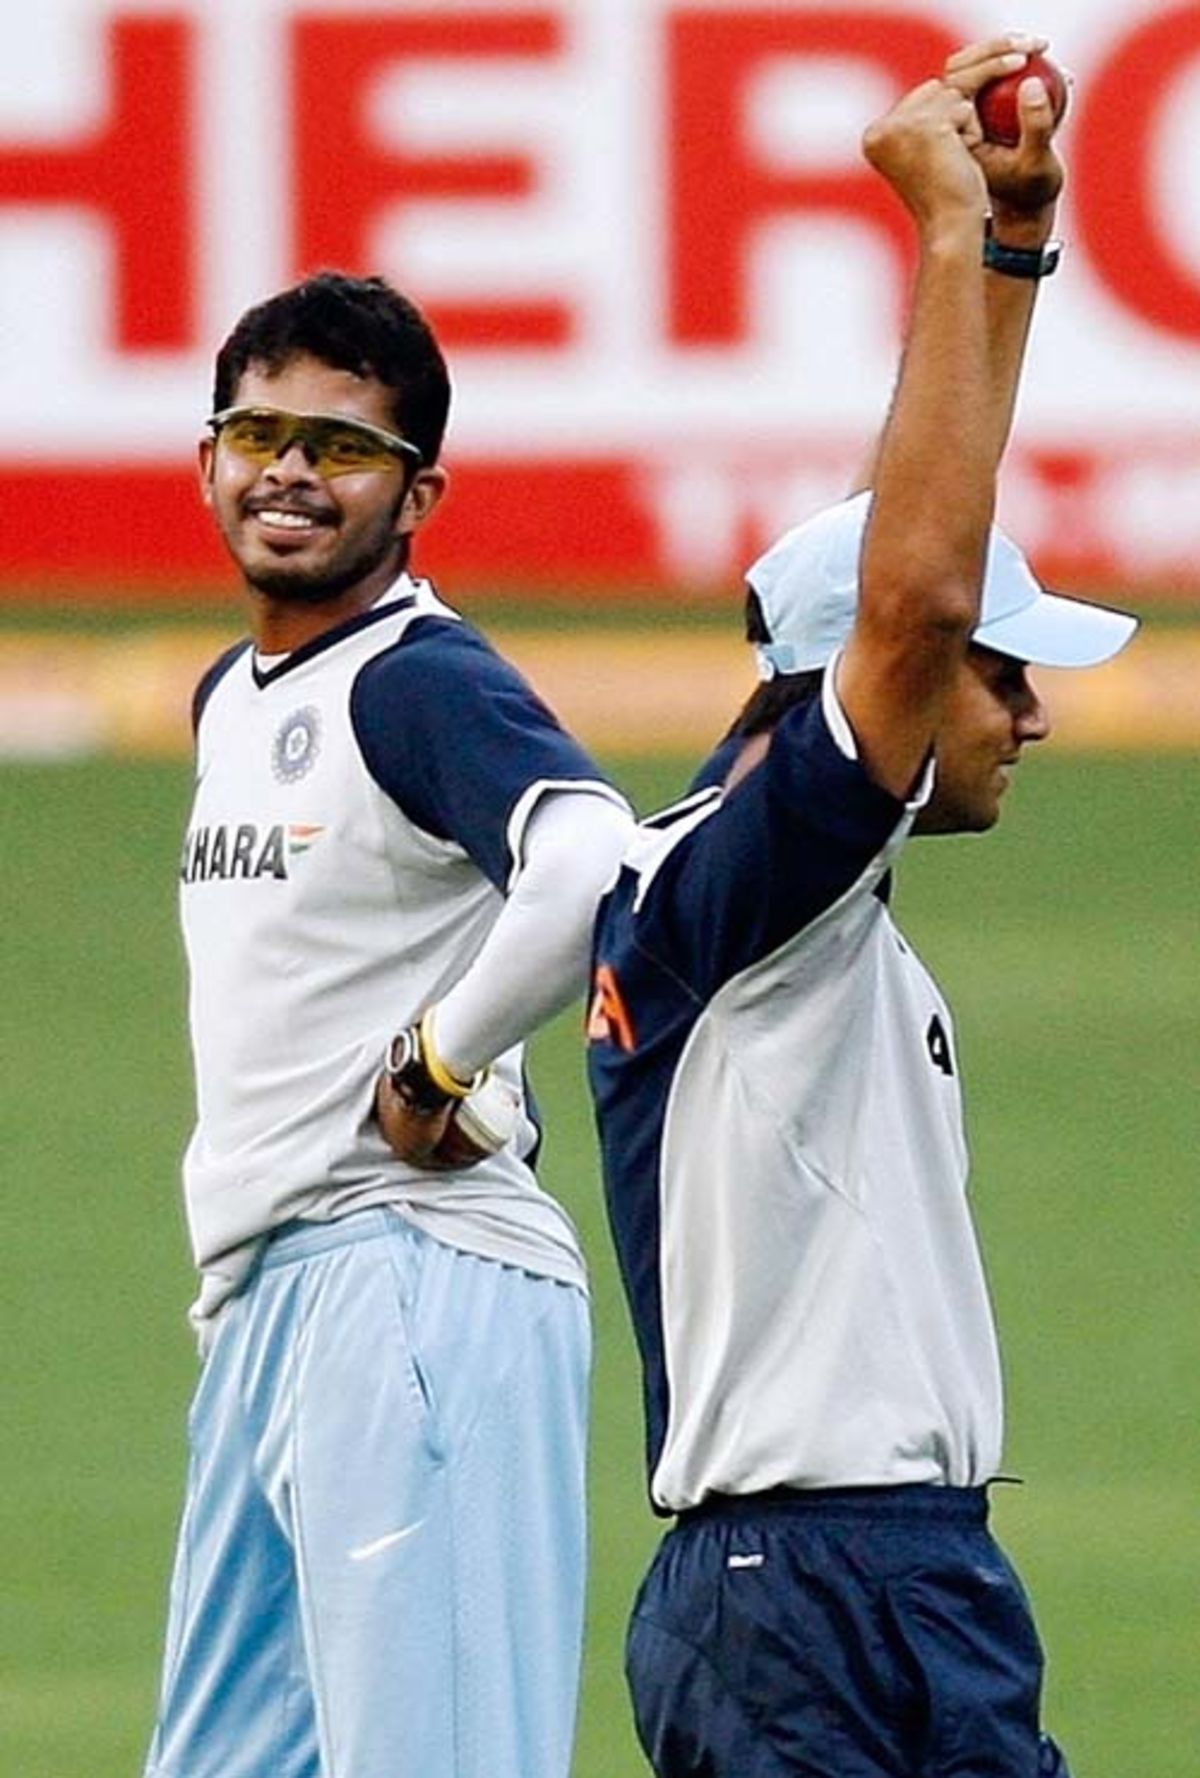 Rahul Dravid and Sreesanth see the funny side of things 